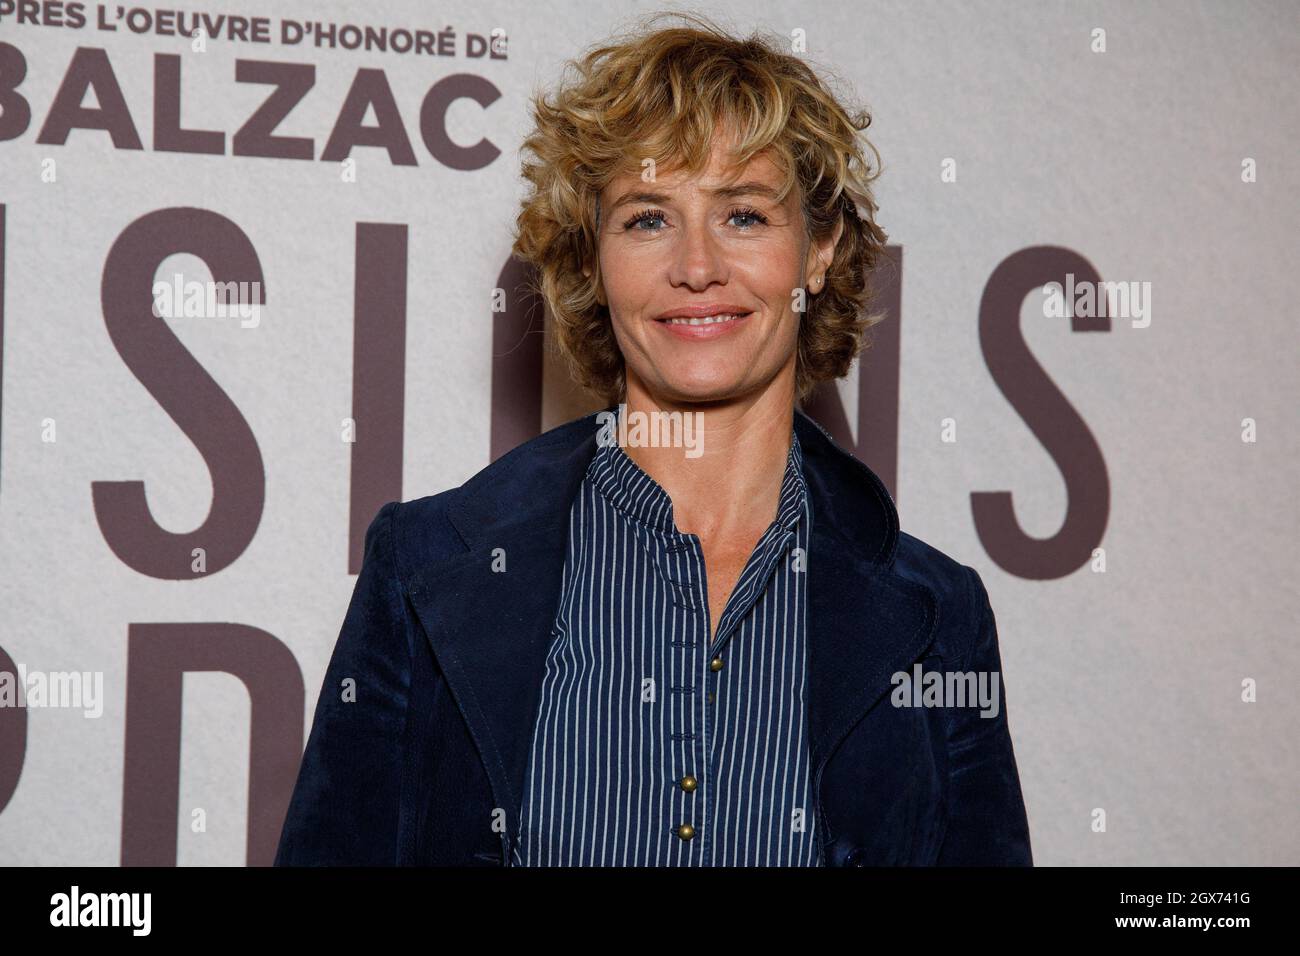 Salome Dewaels attending the premiere of Illusions Perdues held at the UGC  Normandie in Paris, France on October 4, 2021. Photo by David  Boyer/ABACAPRESS.COM Stock Photo - Alamy